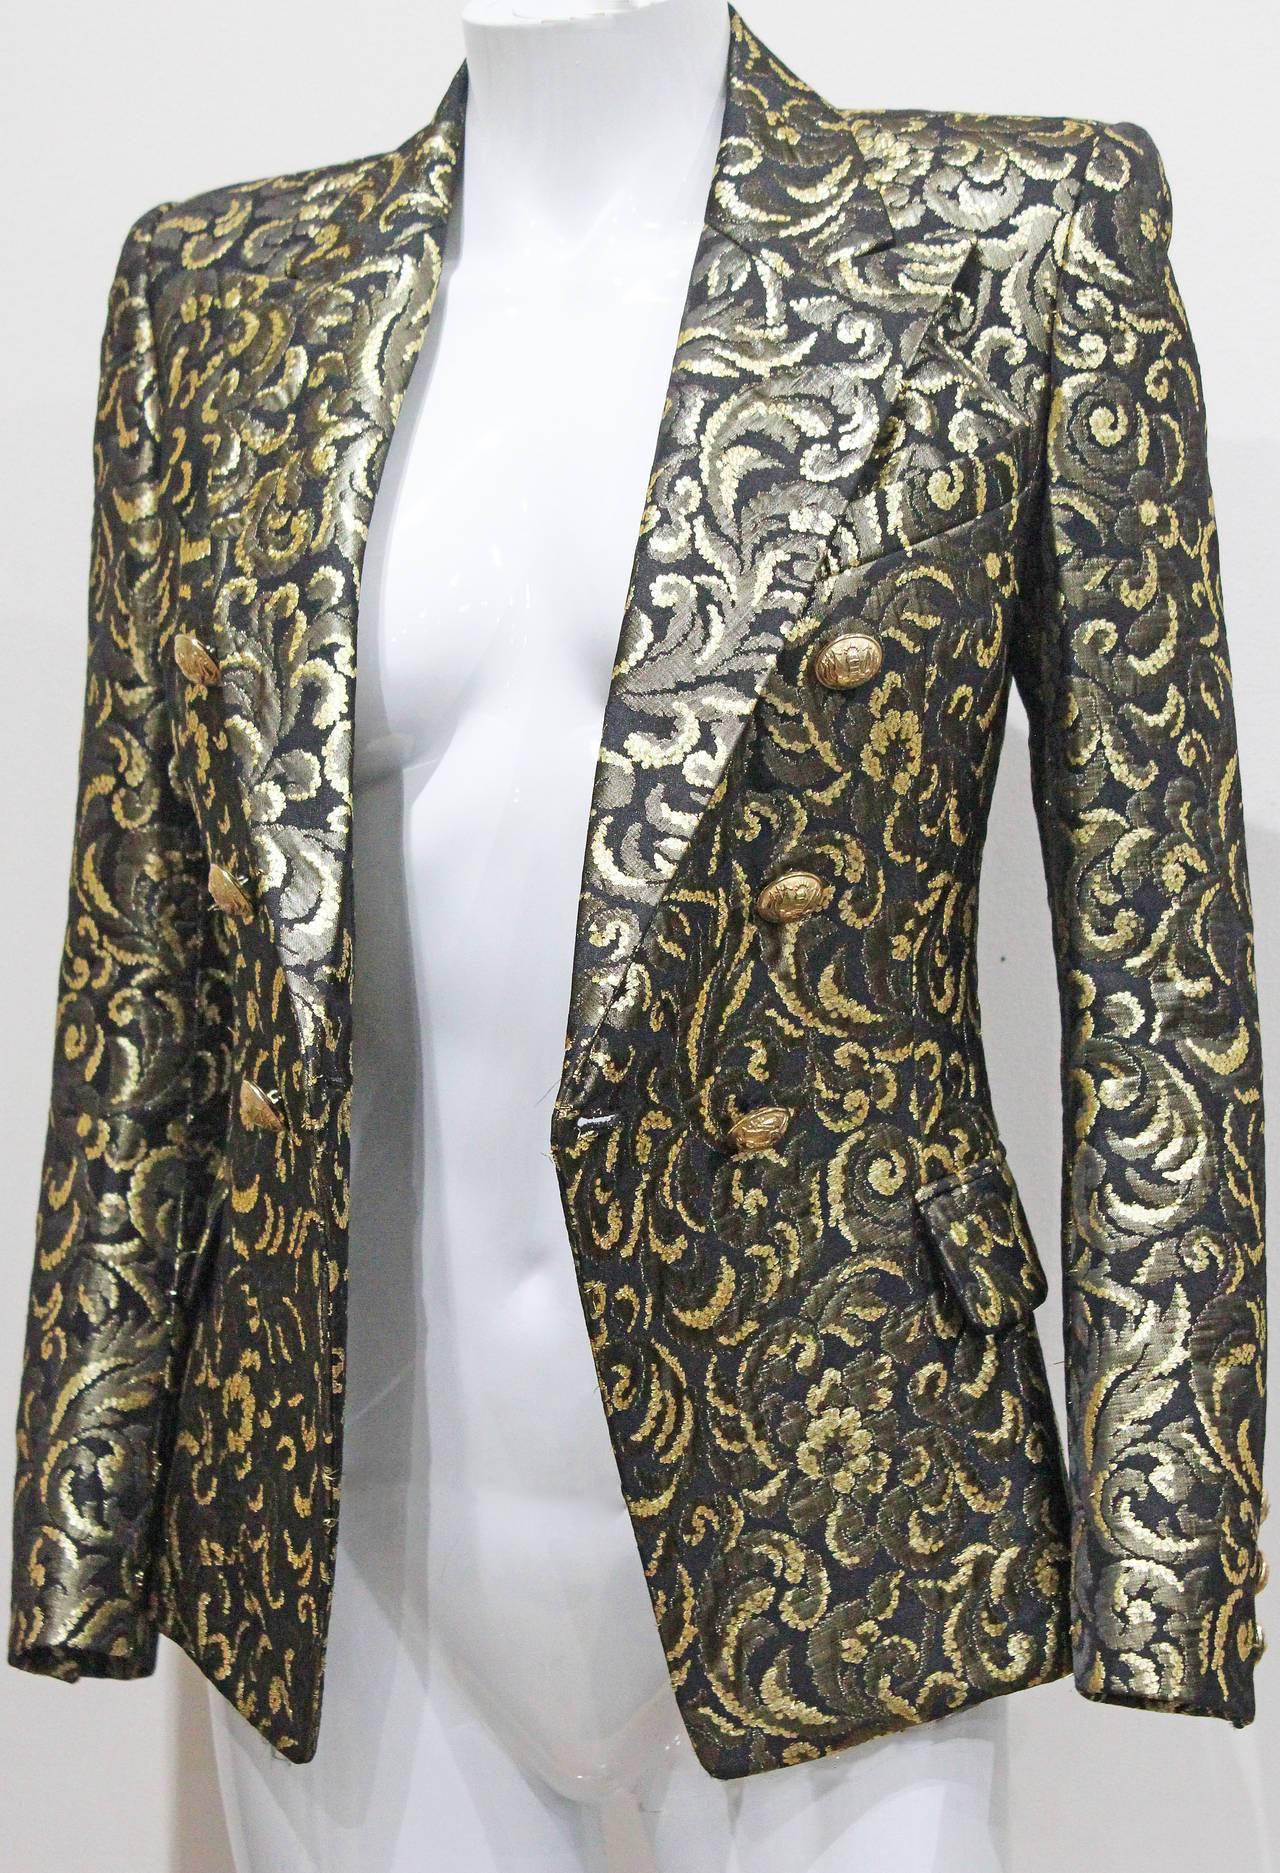 A rare and highly sought after Balmain evening blazer from the Fall 2010 runway collection, designed by Christophe Decarnin. The blazer is in a high quality jacquard fabric with gold-tone lame thread.  

 French 36 / UK 8 / Italy 40 